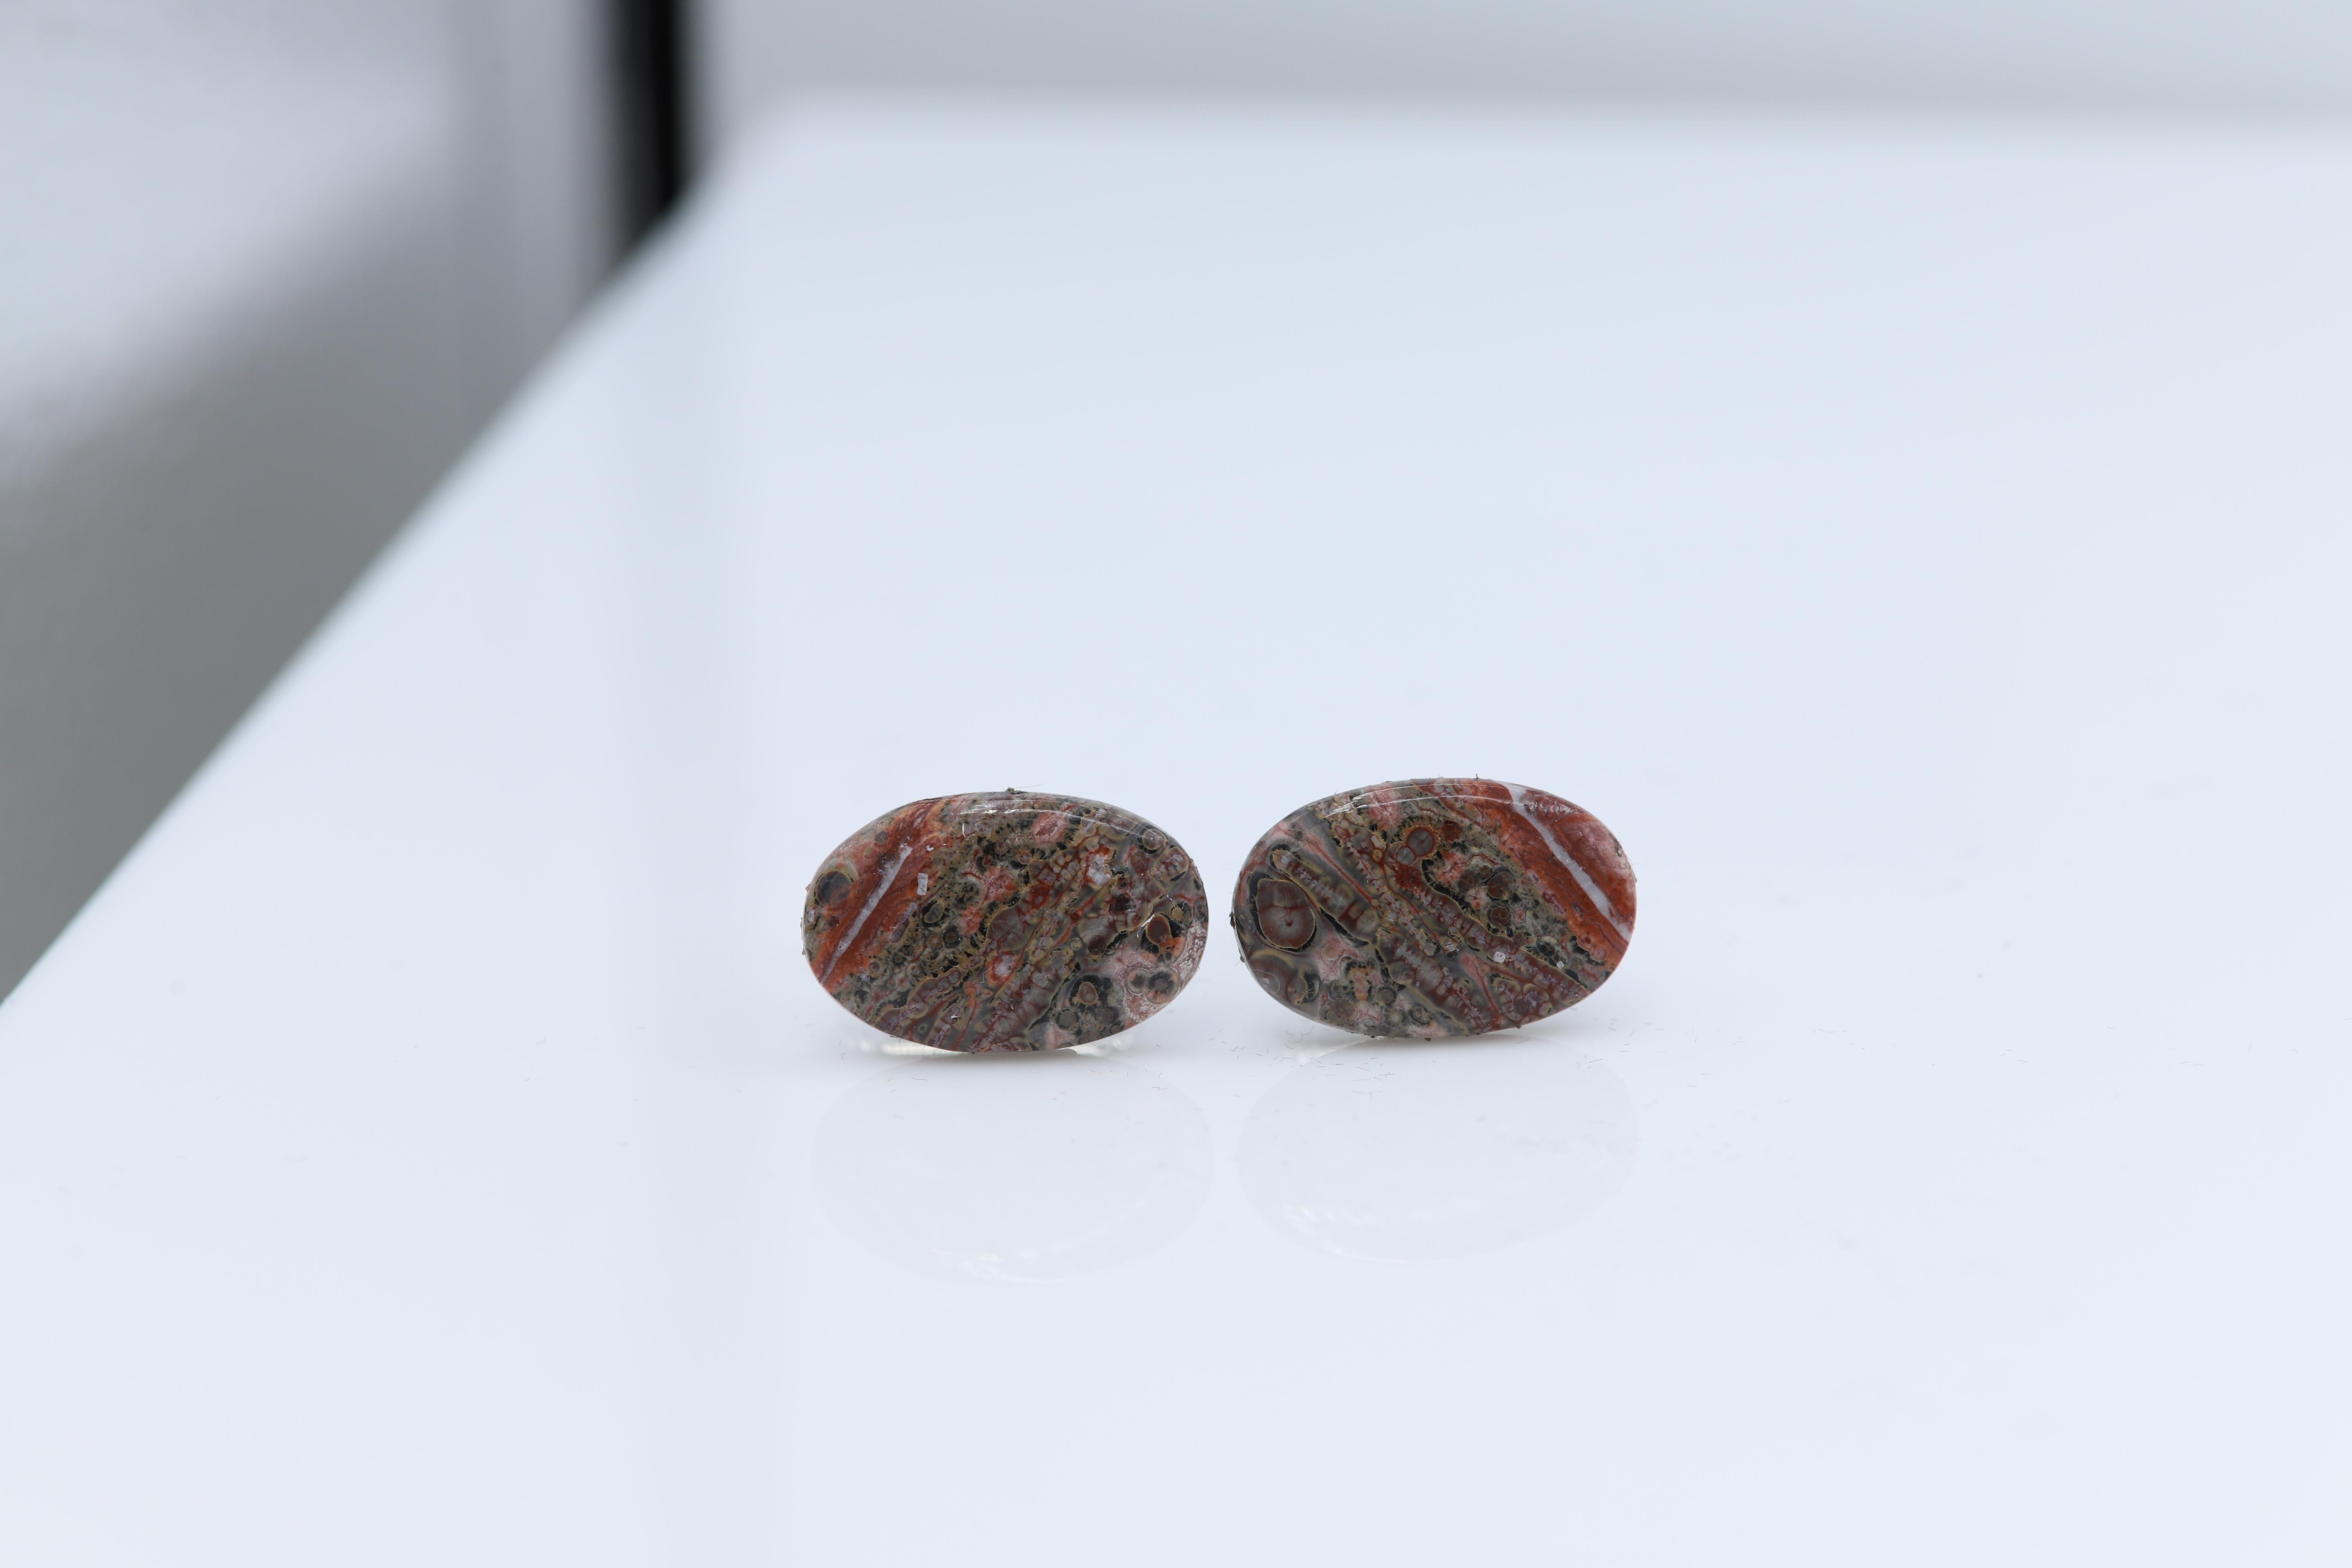 New unique men's cufflink - natural stone.
Stone name: Leopard skin Jasper
Approx. size 22 X 14 MM
Beautiful natural texture.
Imperfection may exist due to natural formations.
Back part metal is a general alloy metal - none precious
Gift Box